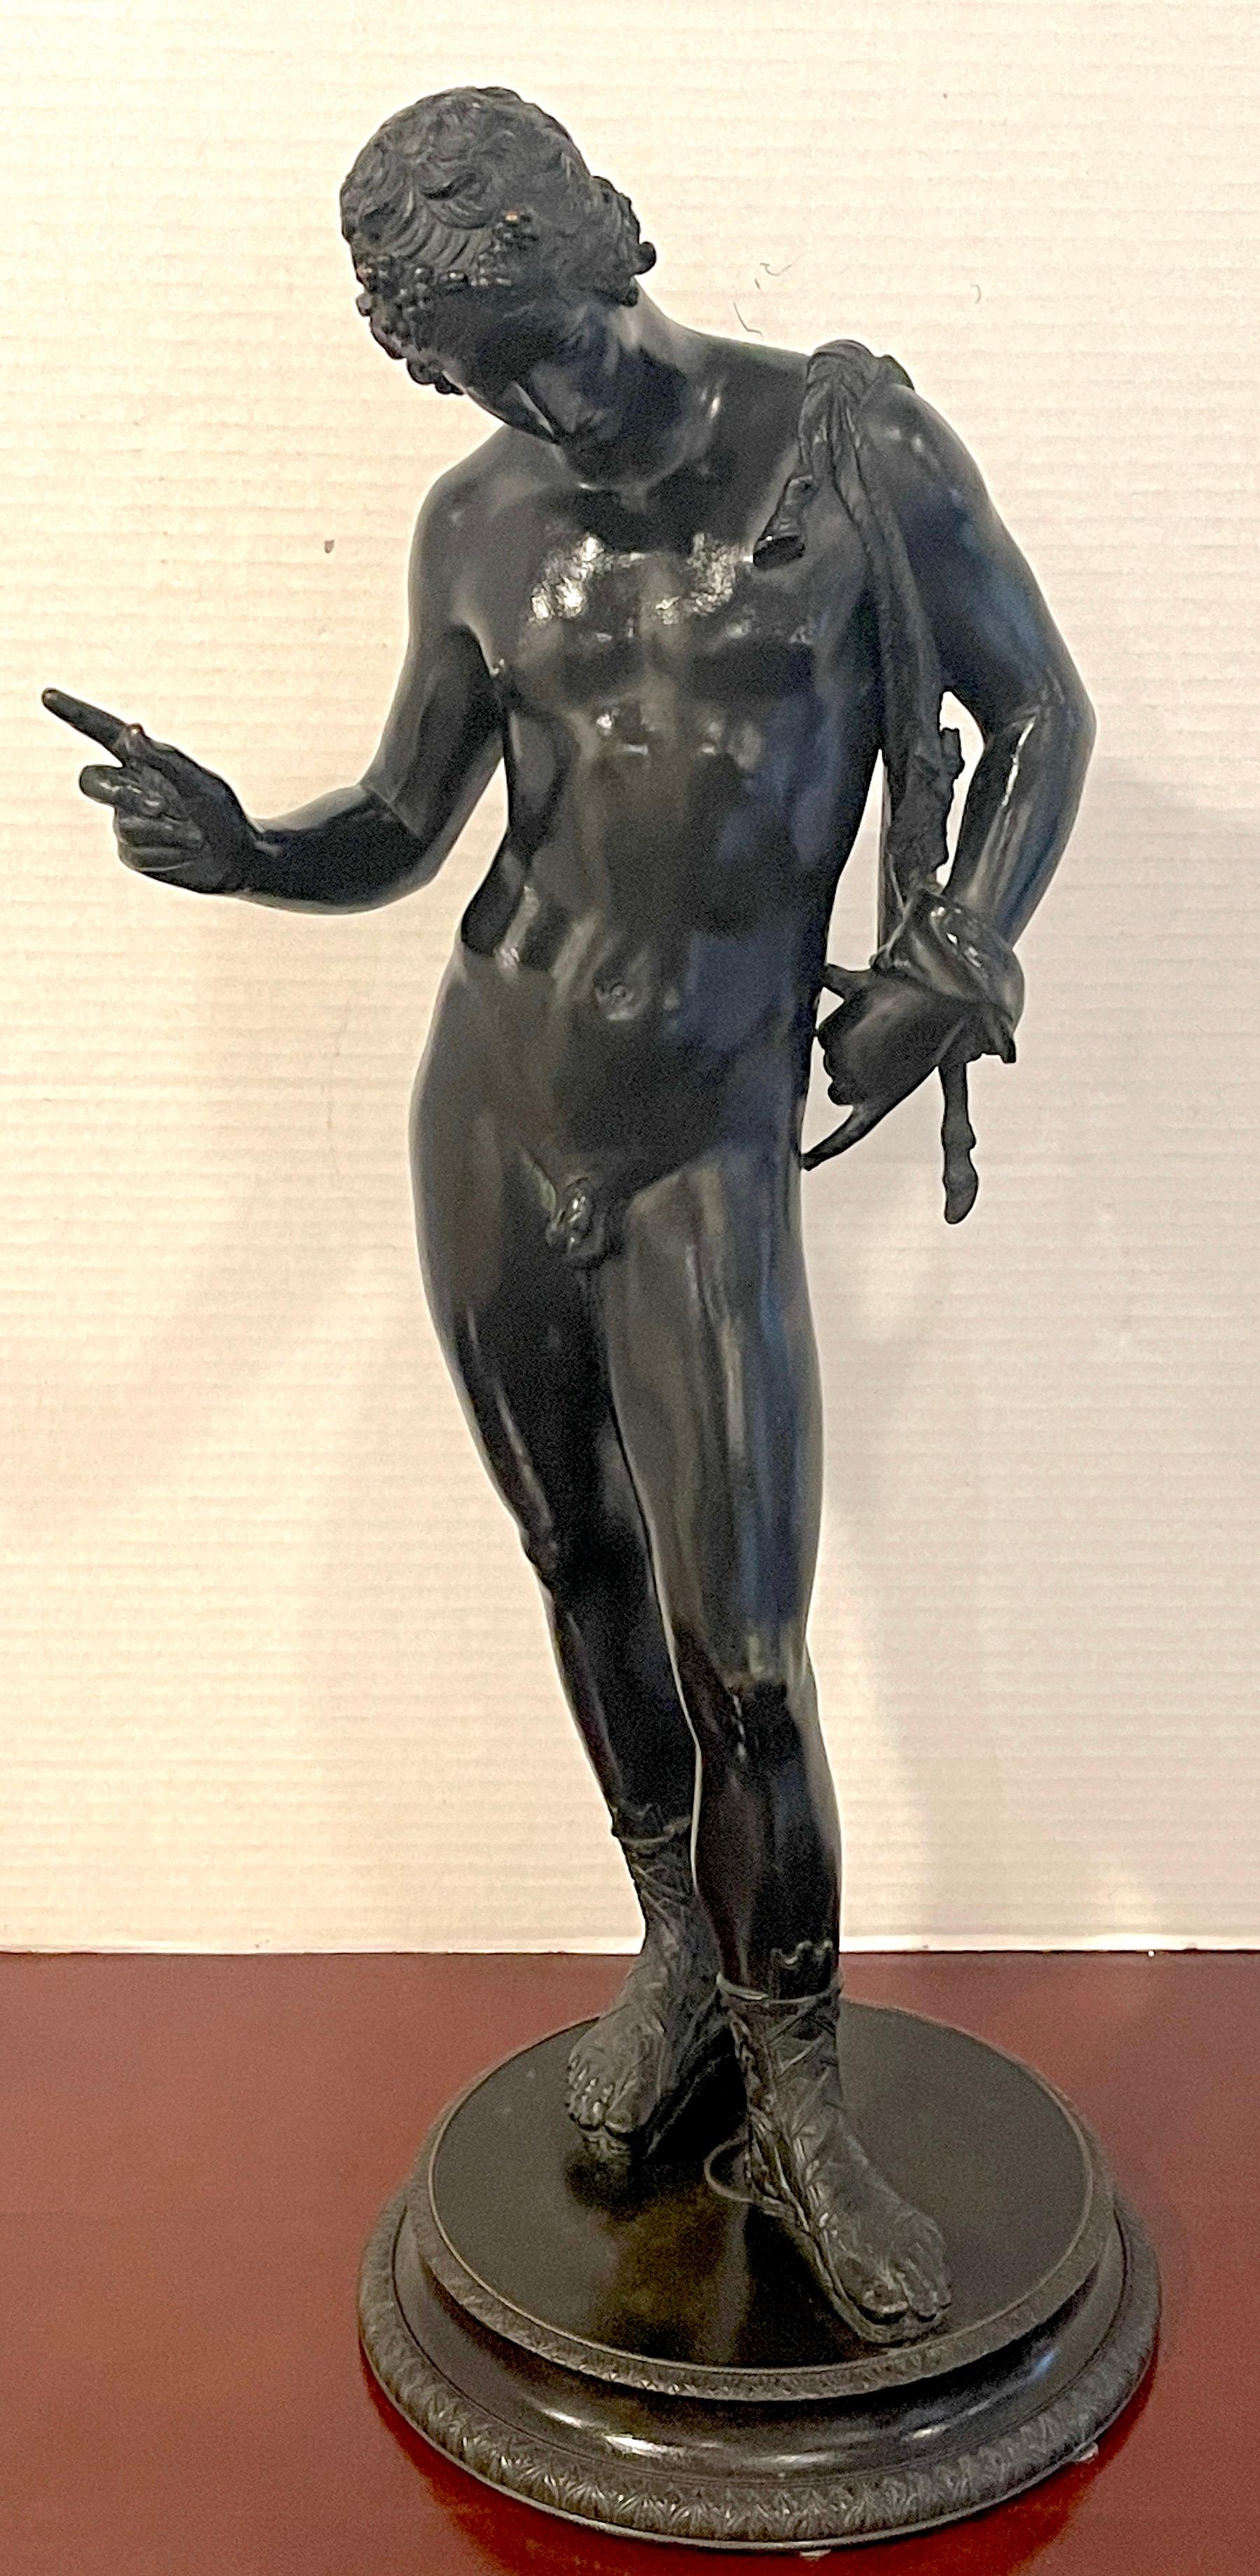 Grand tour patinated bronze figure of Narcissus, Signed, M. Amodio Napoli
A fine example of Italian 19th century grand tour. Standing 24.75-Inches high, the draped figure standing on a circular base with a leaf cast rim and foundry